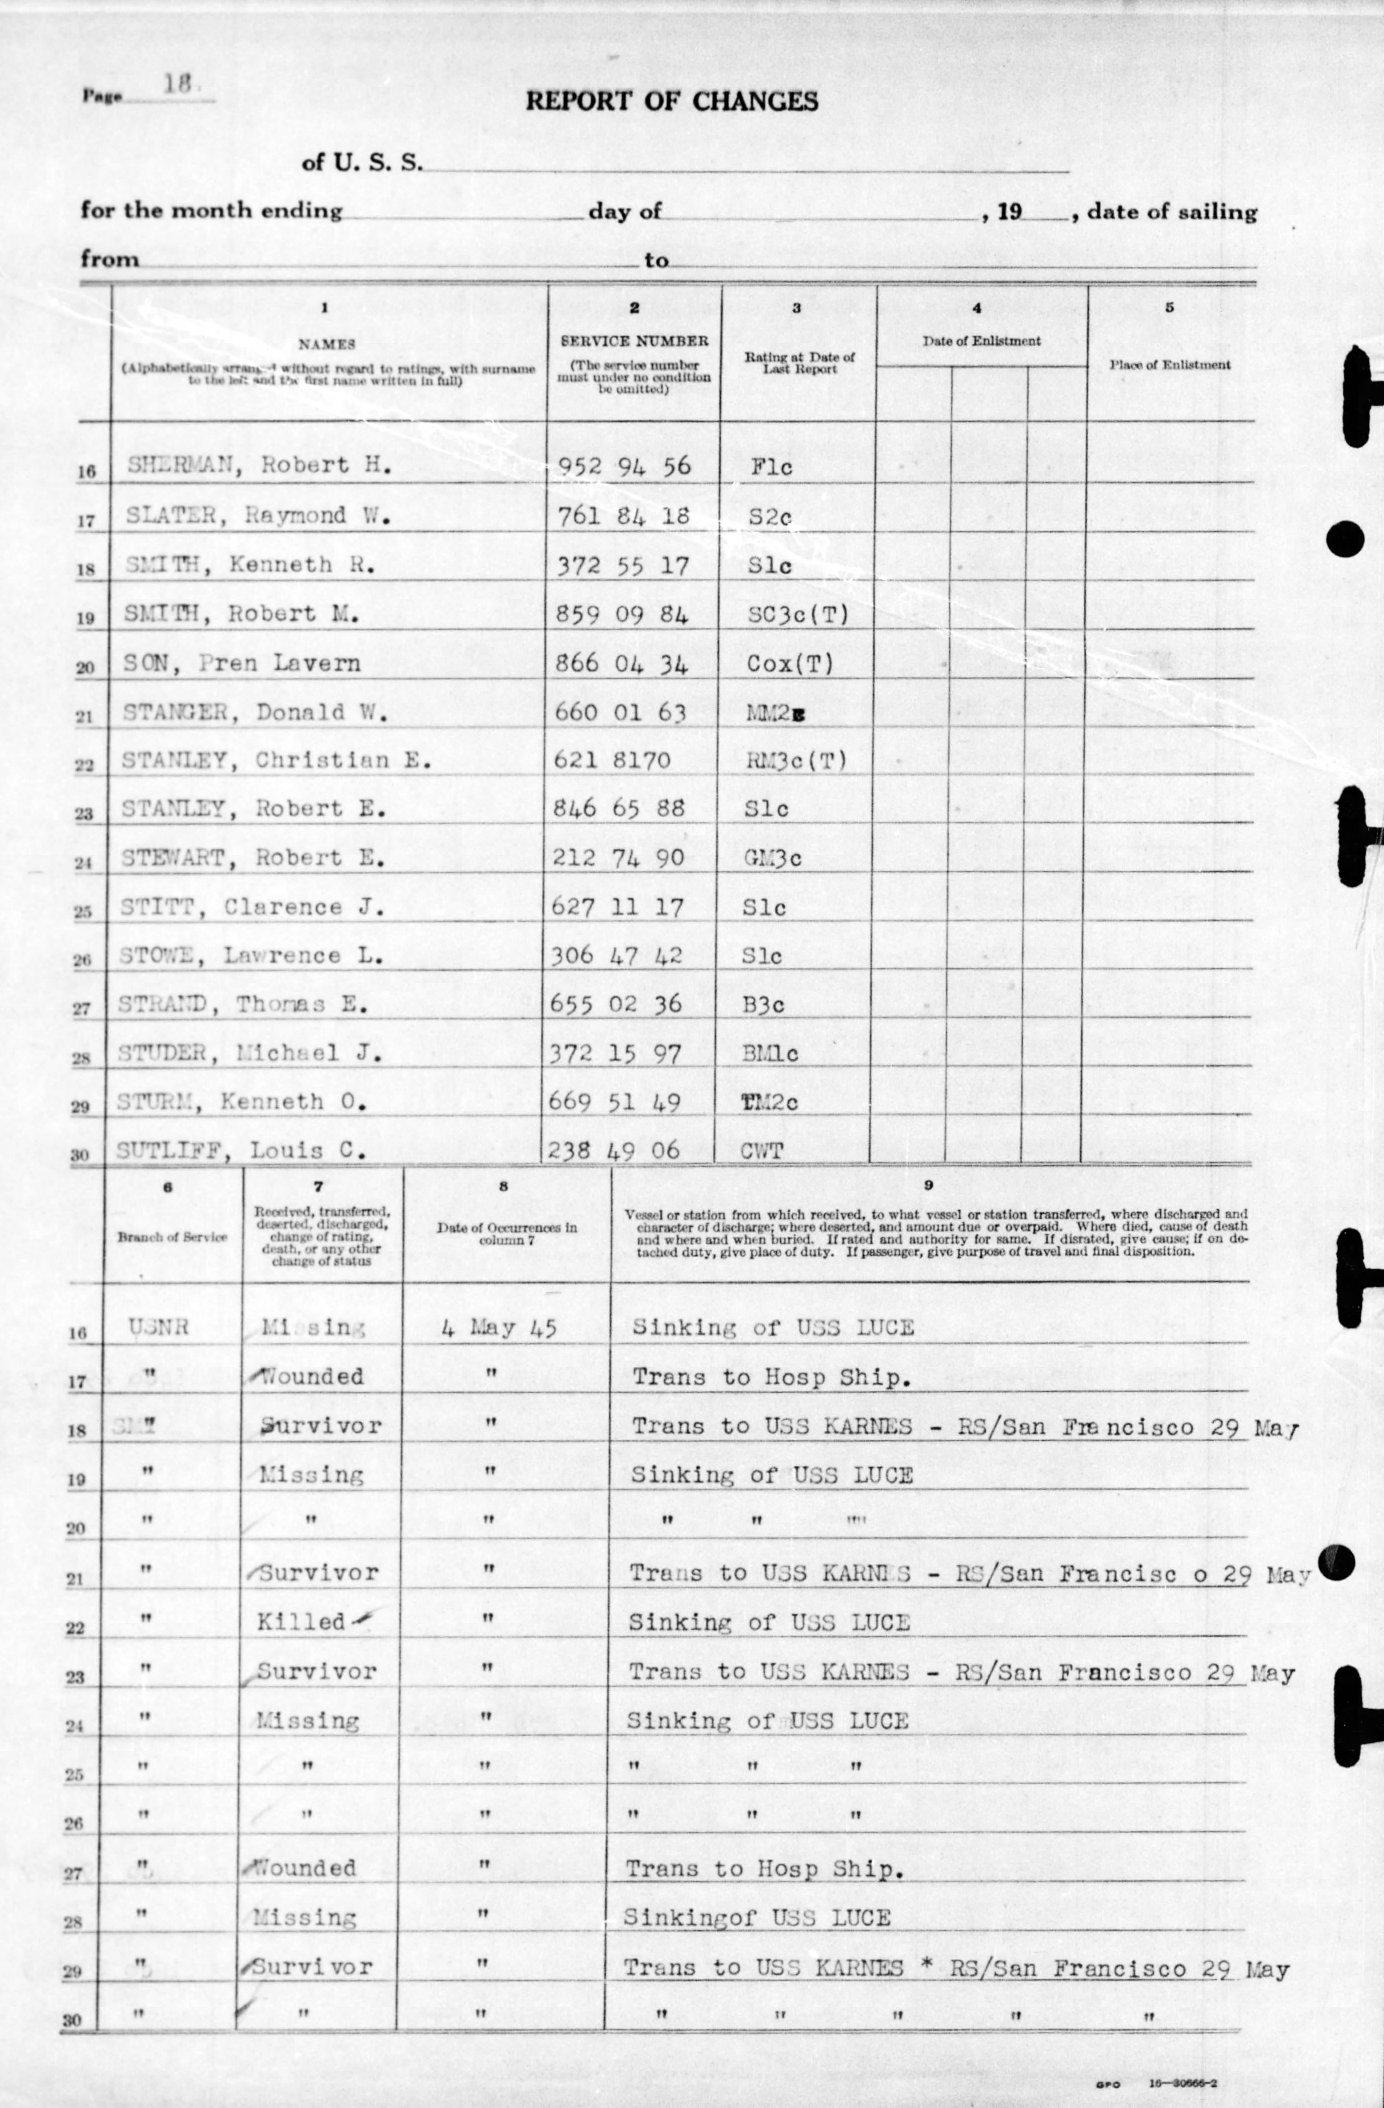 USS Luce final muster list dated June 19, 1945 after the ship was sunk May 4, 1945. Page 20 of 25.